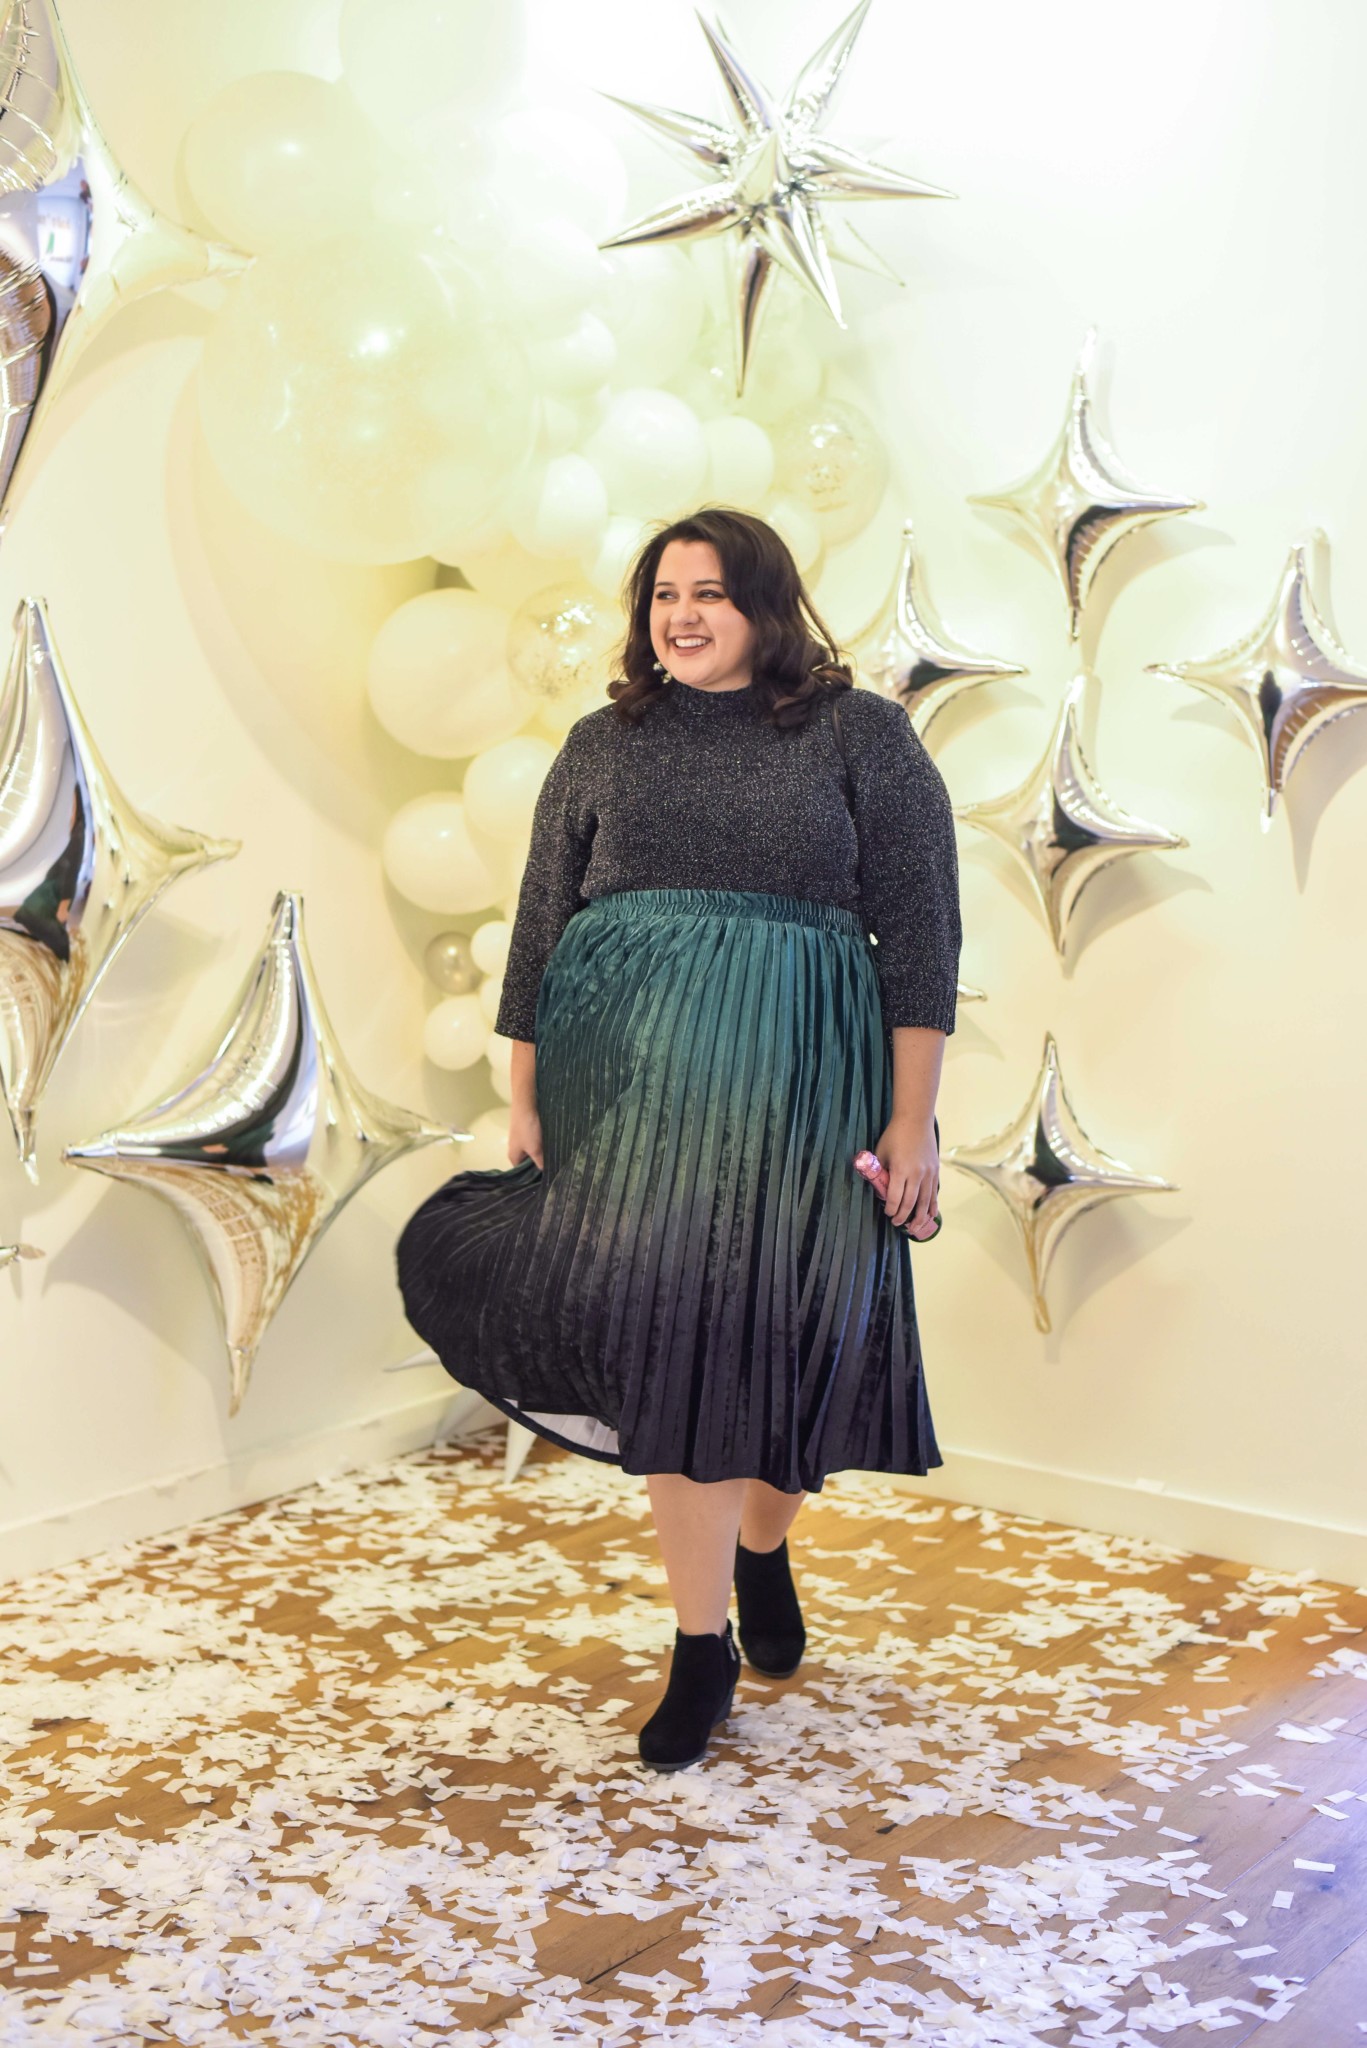 A fun plus size new year's eve for a casual party at a friend's house